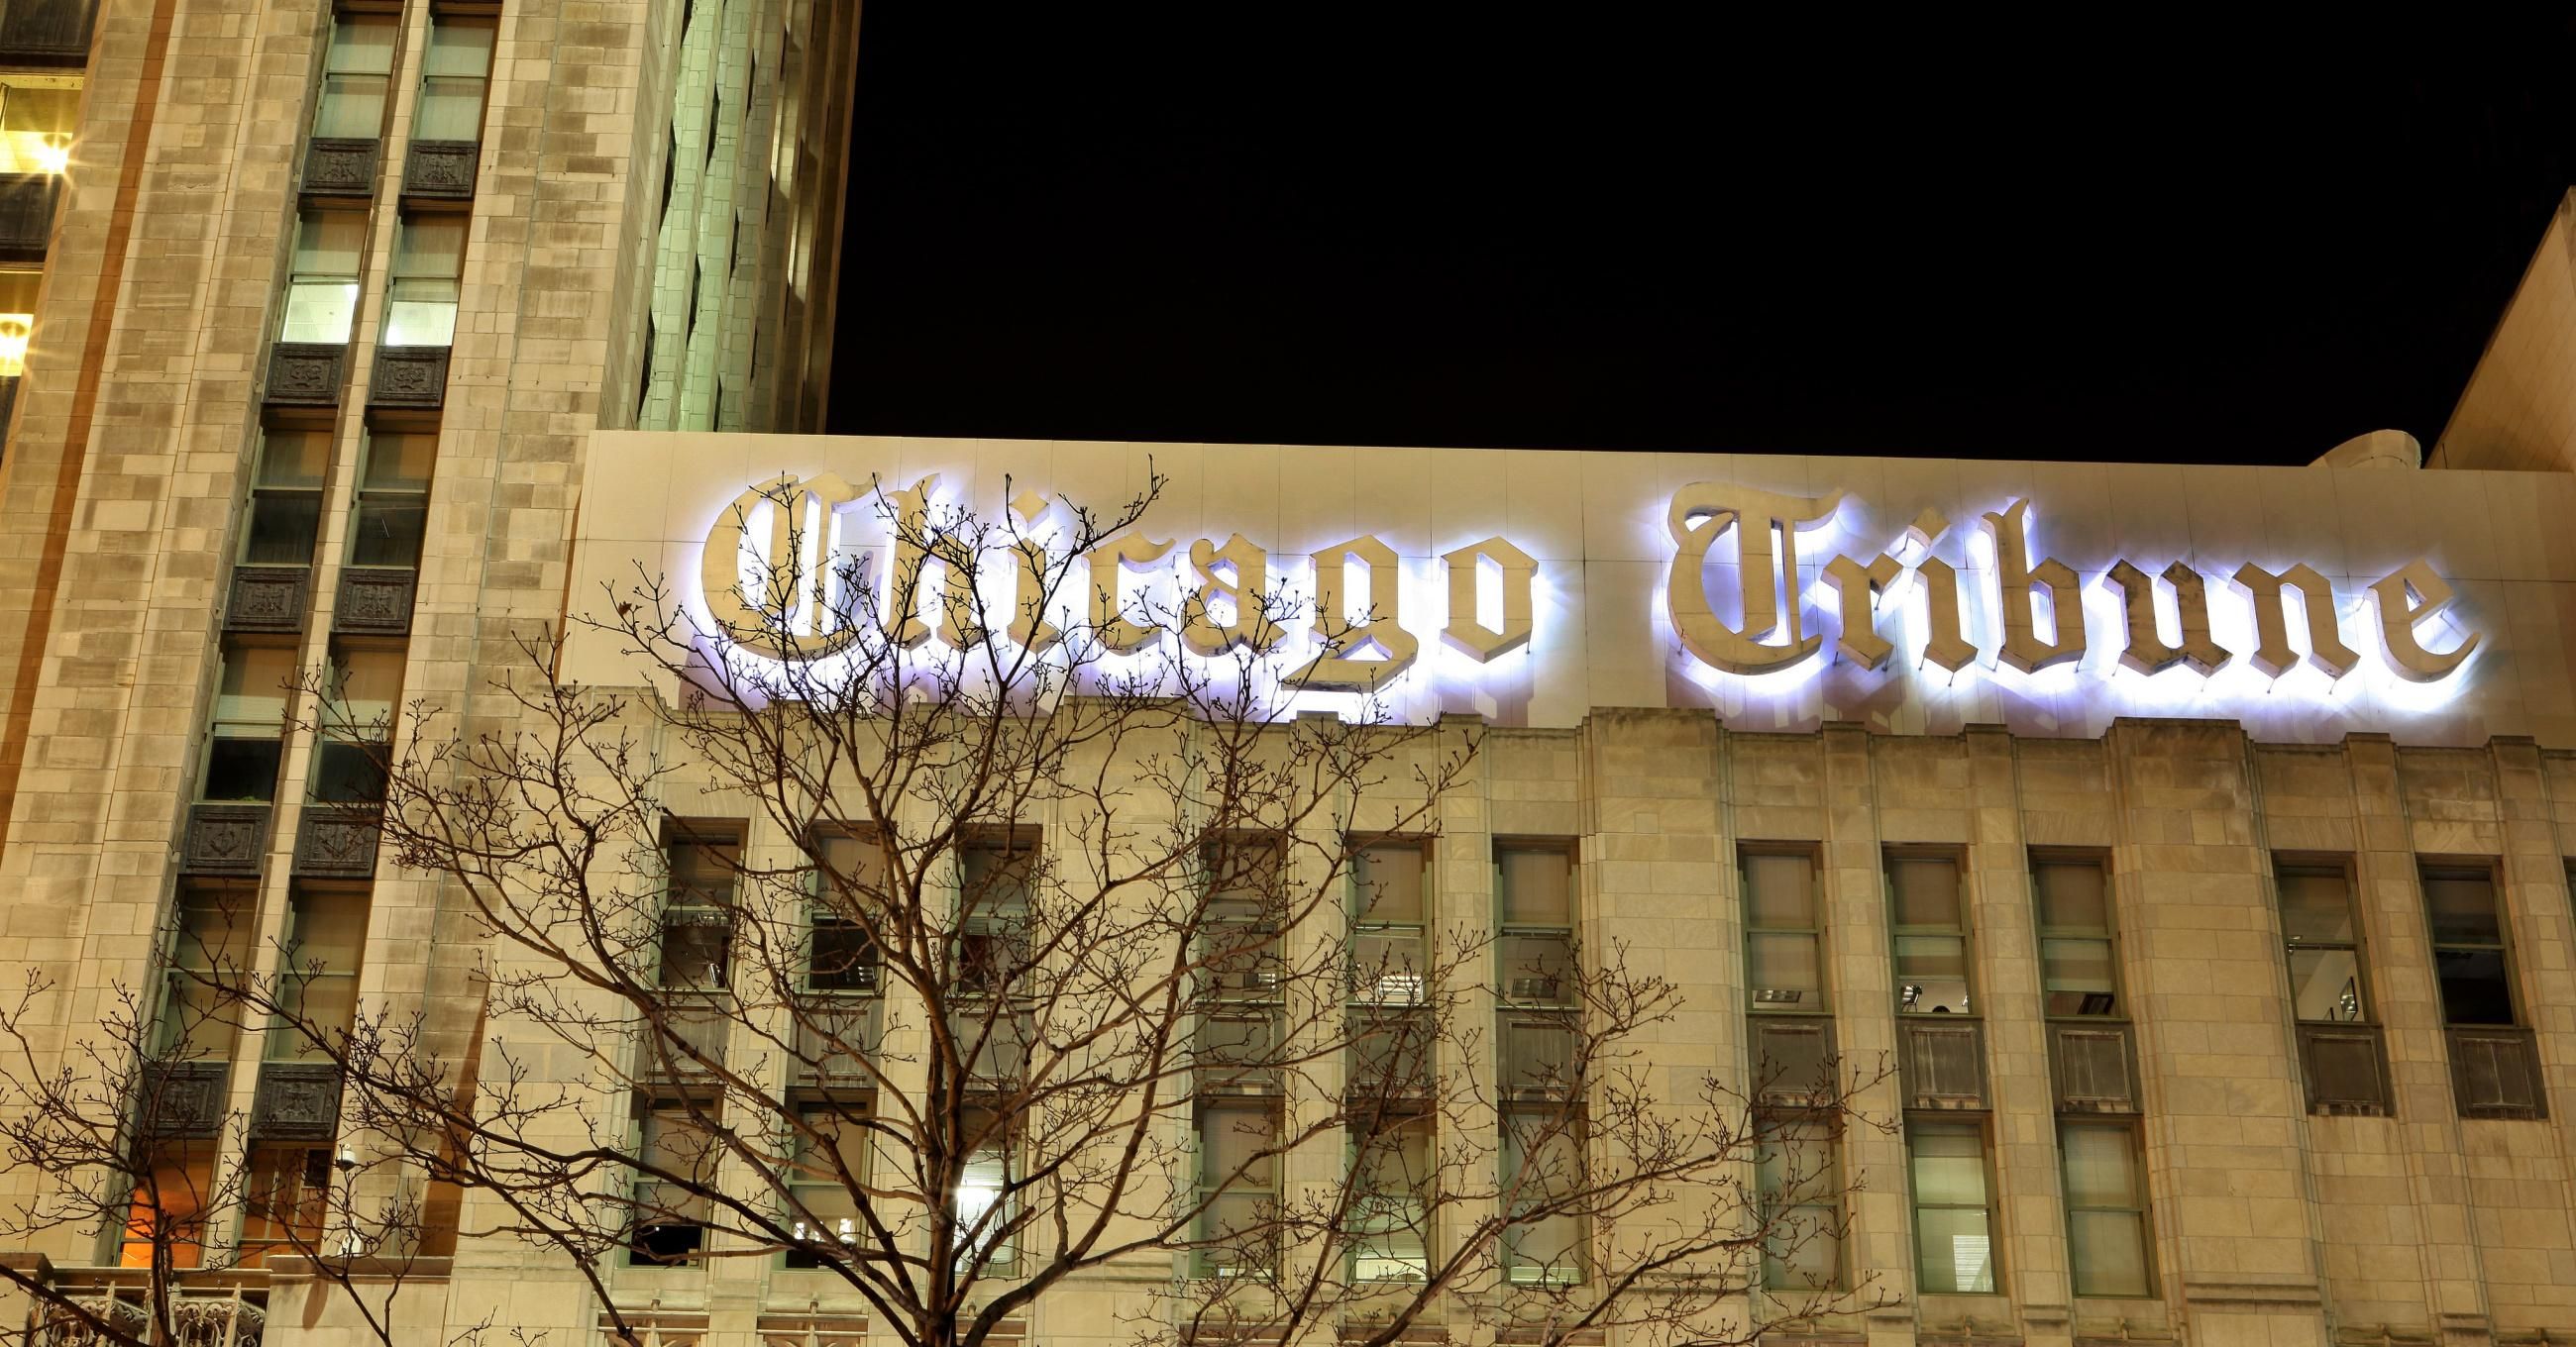 Shareholders on Friday approved a hedge fund's proposed takeover of Tribune Publishing, which owns the Chicago Tribune and other major newspapers. (Photo: Raymond Boyd/Michael Ochs Archives/Getty Images)